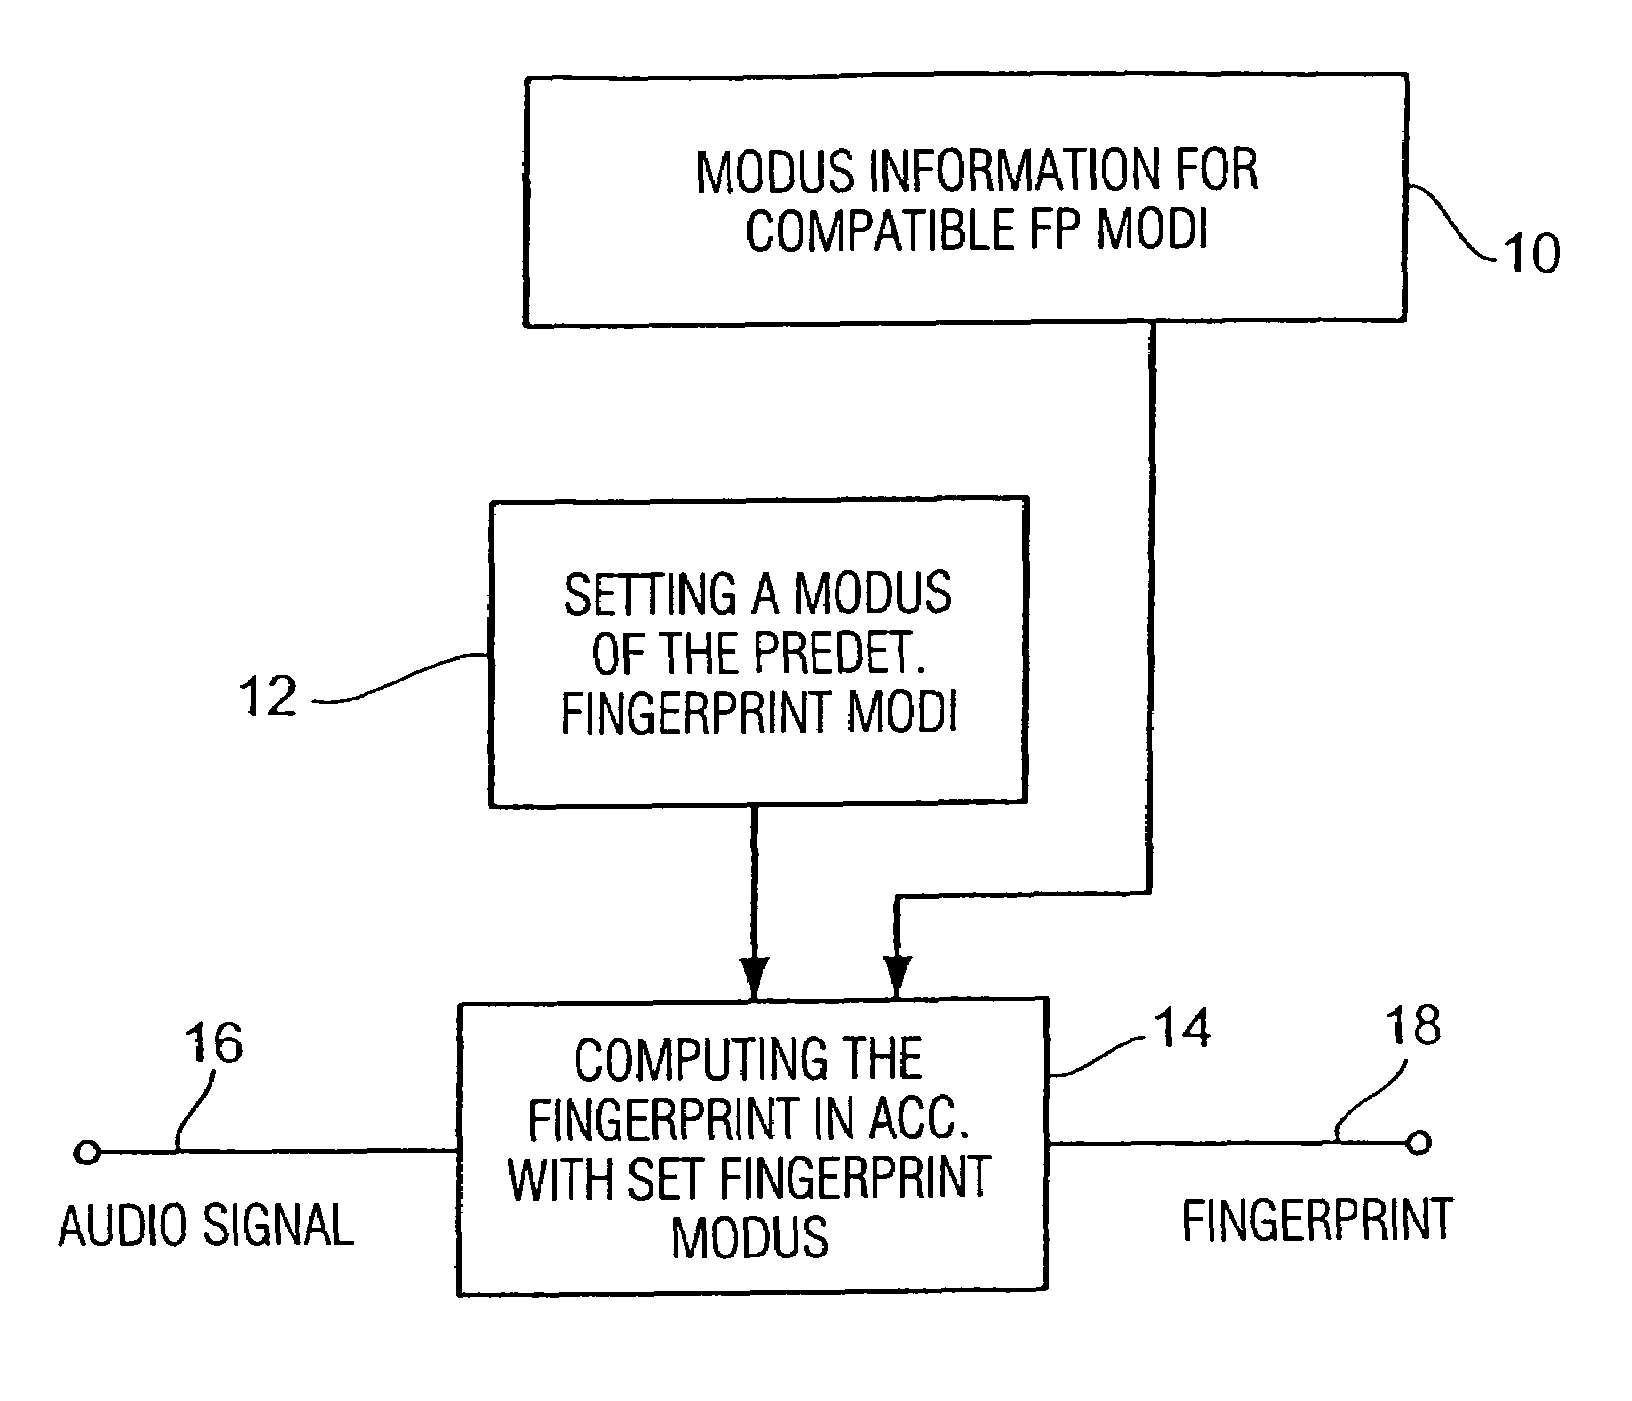 Method and apparatus for producing a fingerprint, and method and apparatus for identifying an audio signal